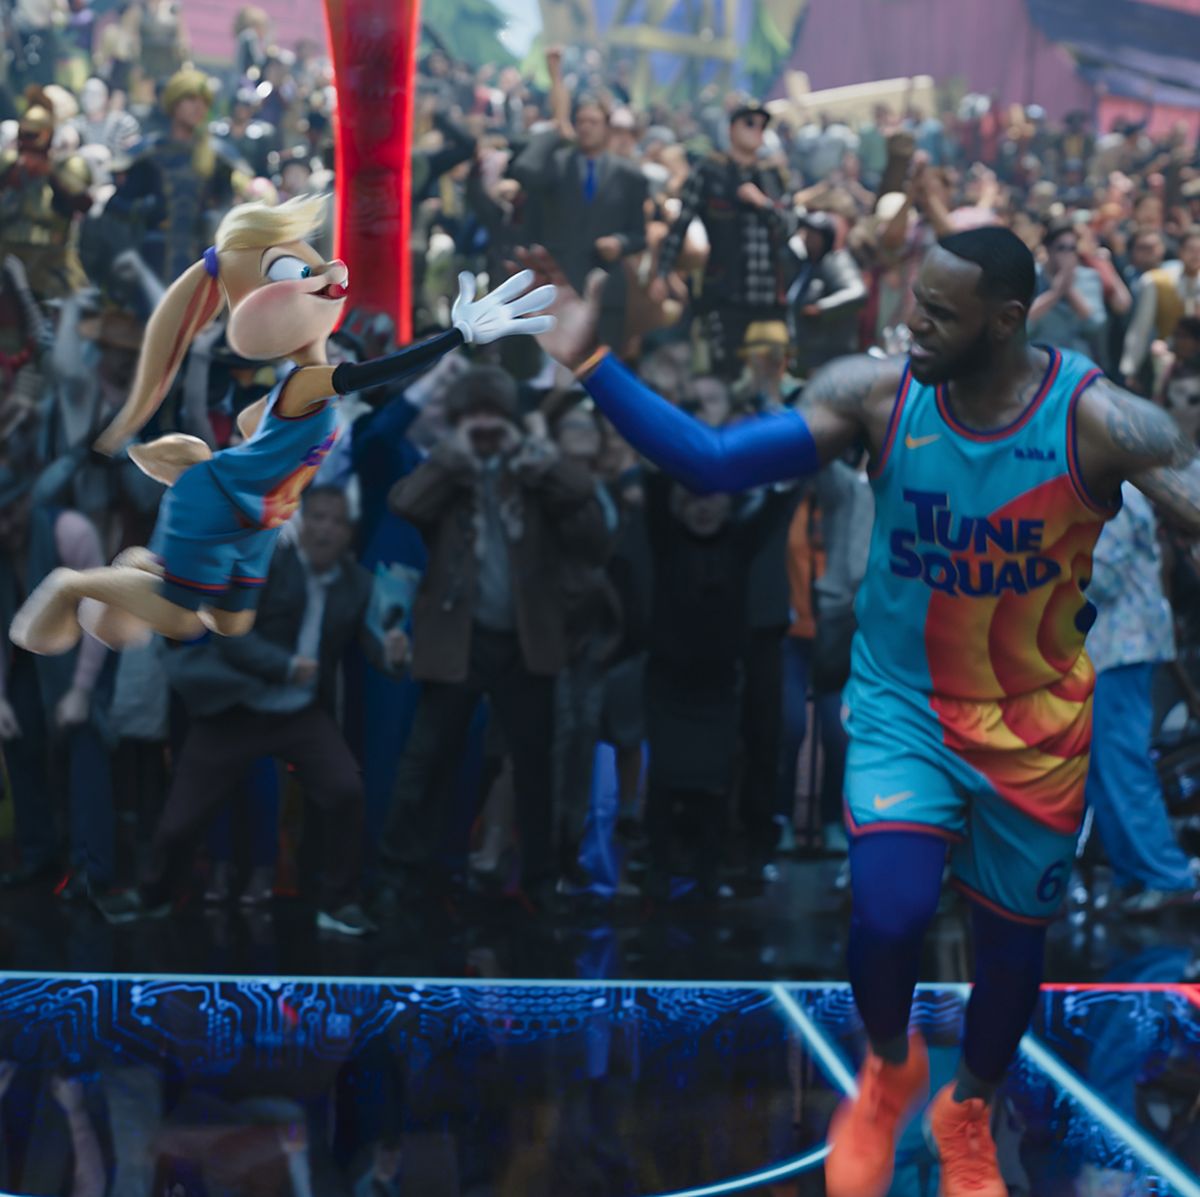 Warner Bros teases Space Jam, The Suicide Squad HBO Max releases